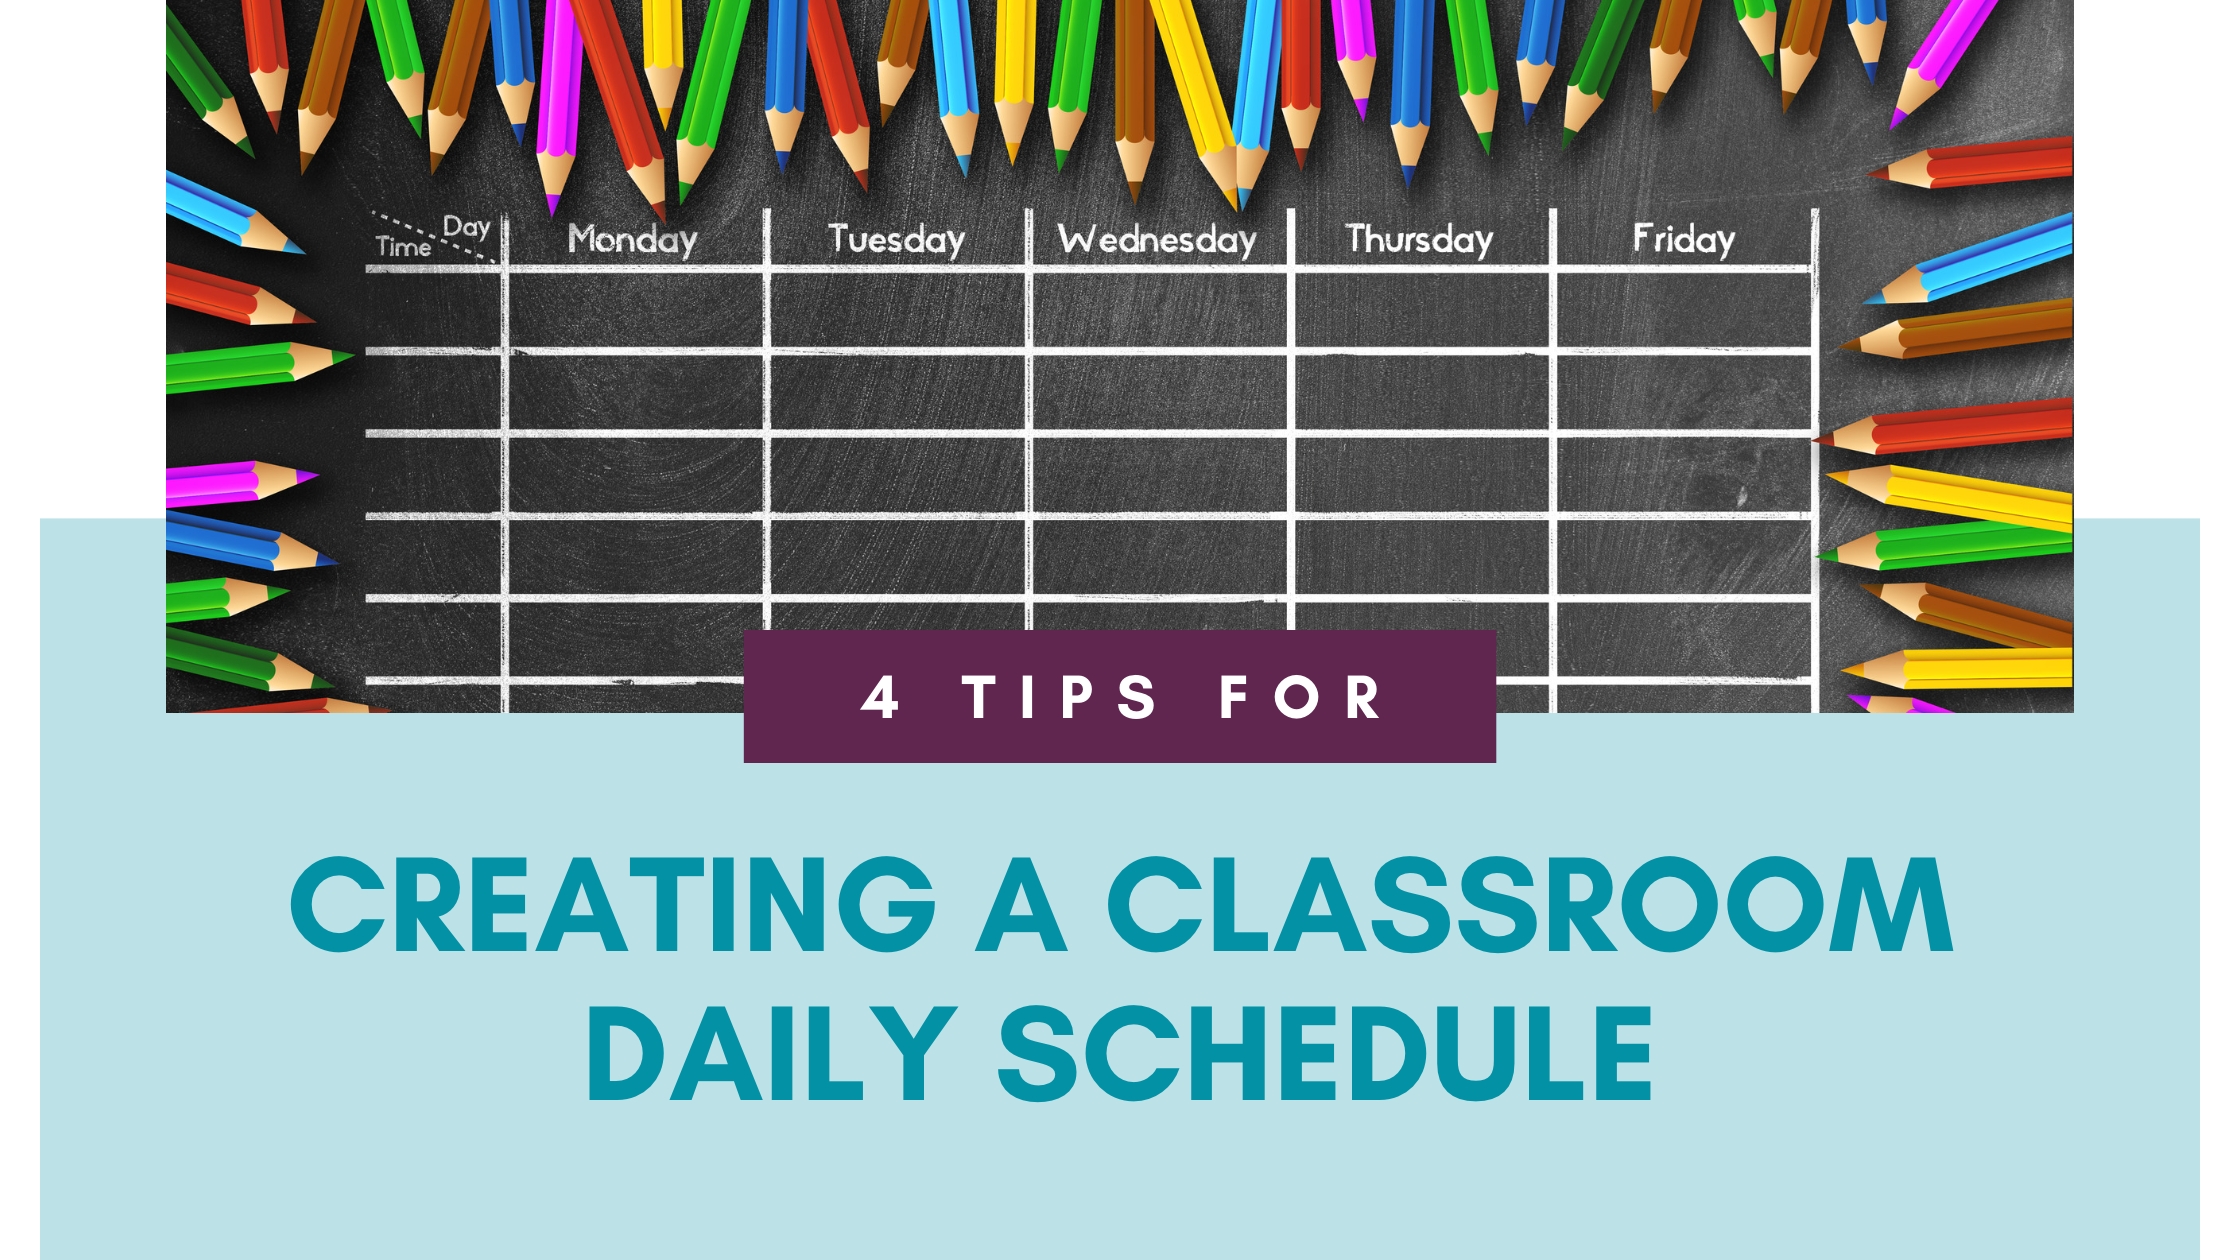 4 Tips for Creating a Classroom Daily Schedule Blog Post Header Image